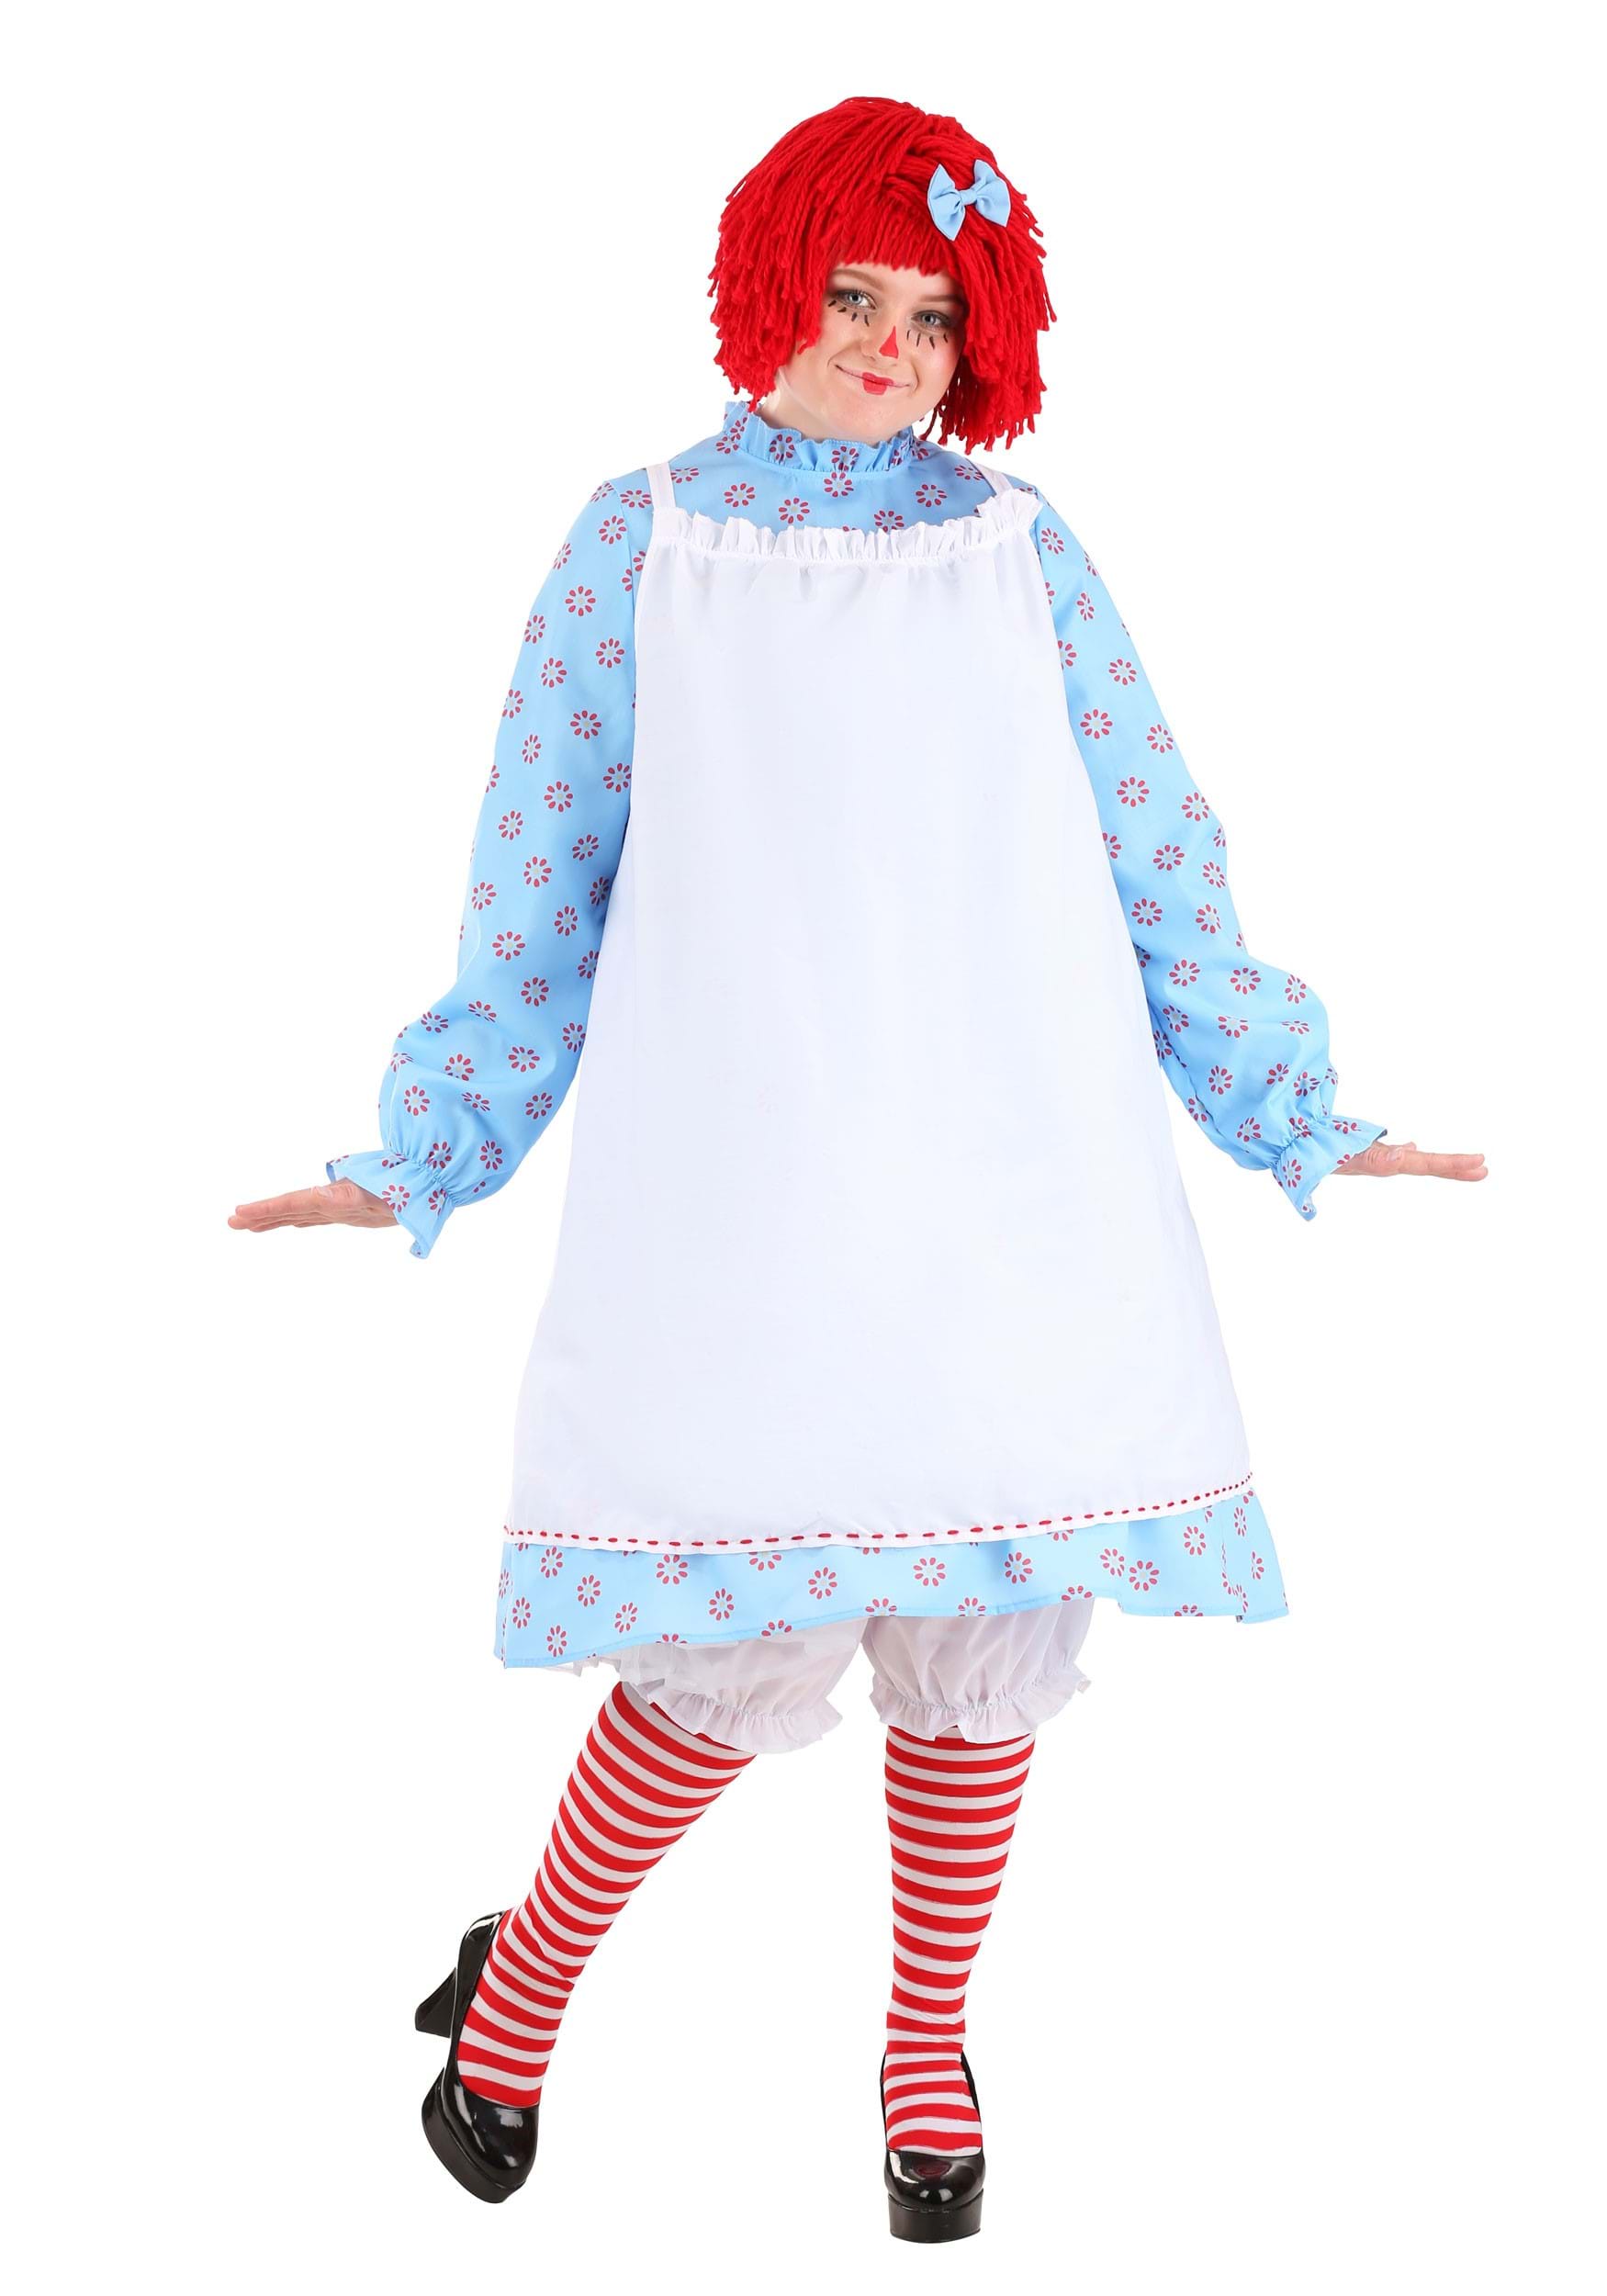 Photos - Fancy Dress FUN Costumes Plus Size Raggedy Ann Exclusive Costume for Women Red/Blu